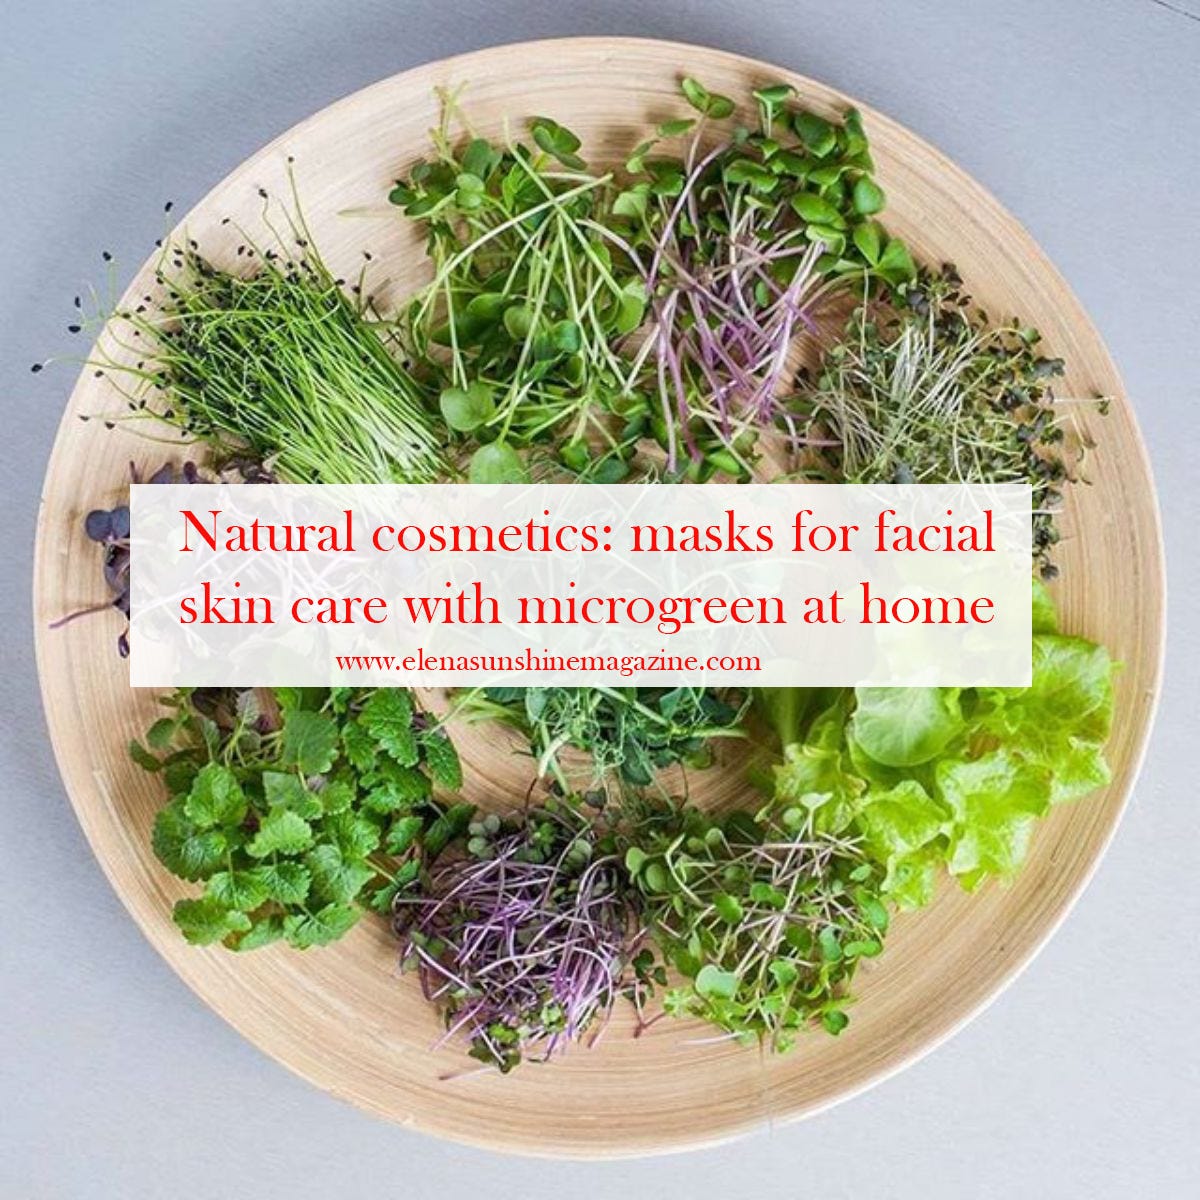 Natural cosmetics masks for facial skin care with microgreen at home by Elena pic image